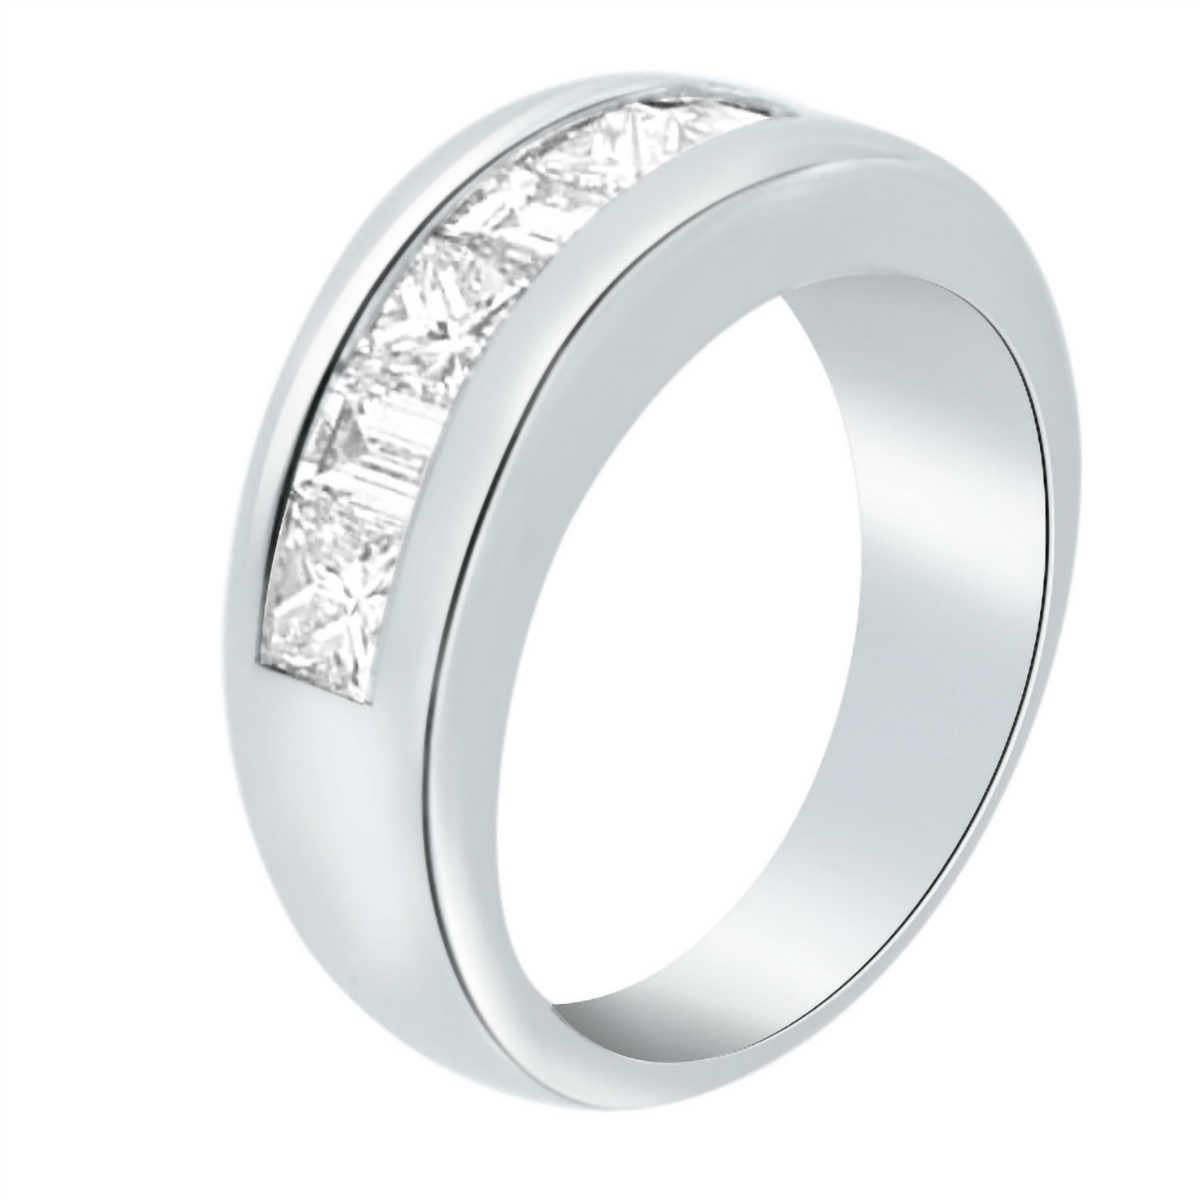 This Platinum handcrafted Women's band showcases alternating Princess Cut & Baguette diamonds on a seven (7) MM wide tapered band. The band is in a polished finish.

Diamond Weight : 1.43 Carats
Diamond Color: H
Diamond Clarity: VS2-SI1
Finger size